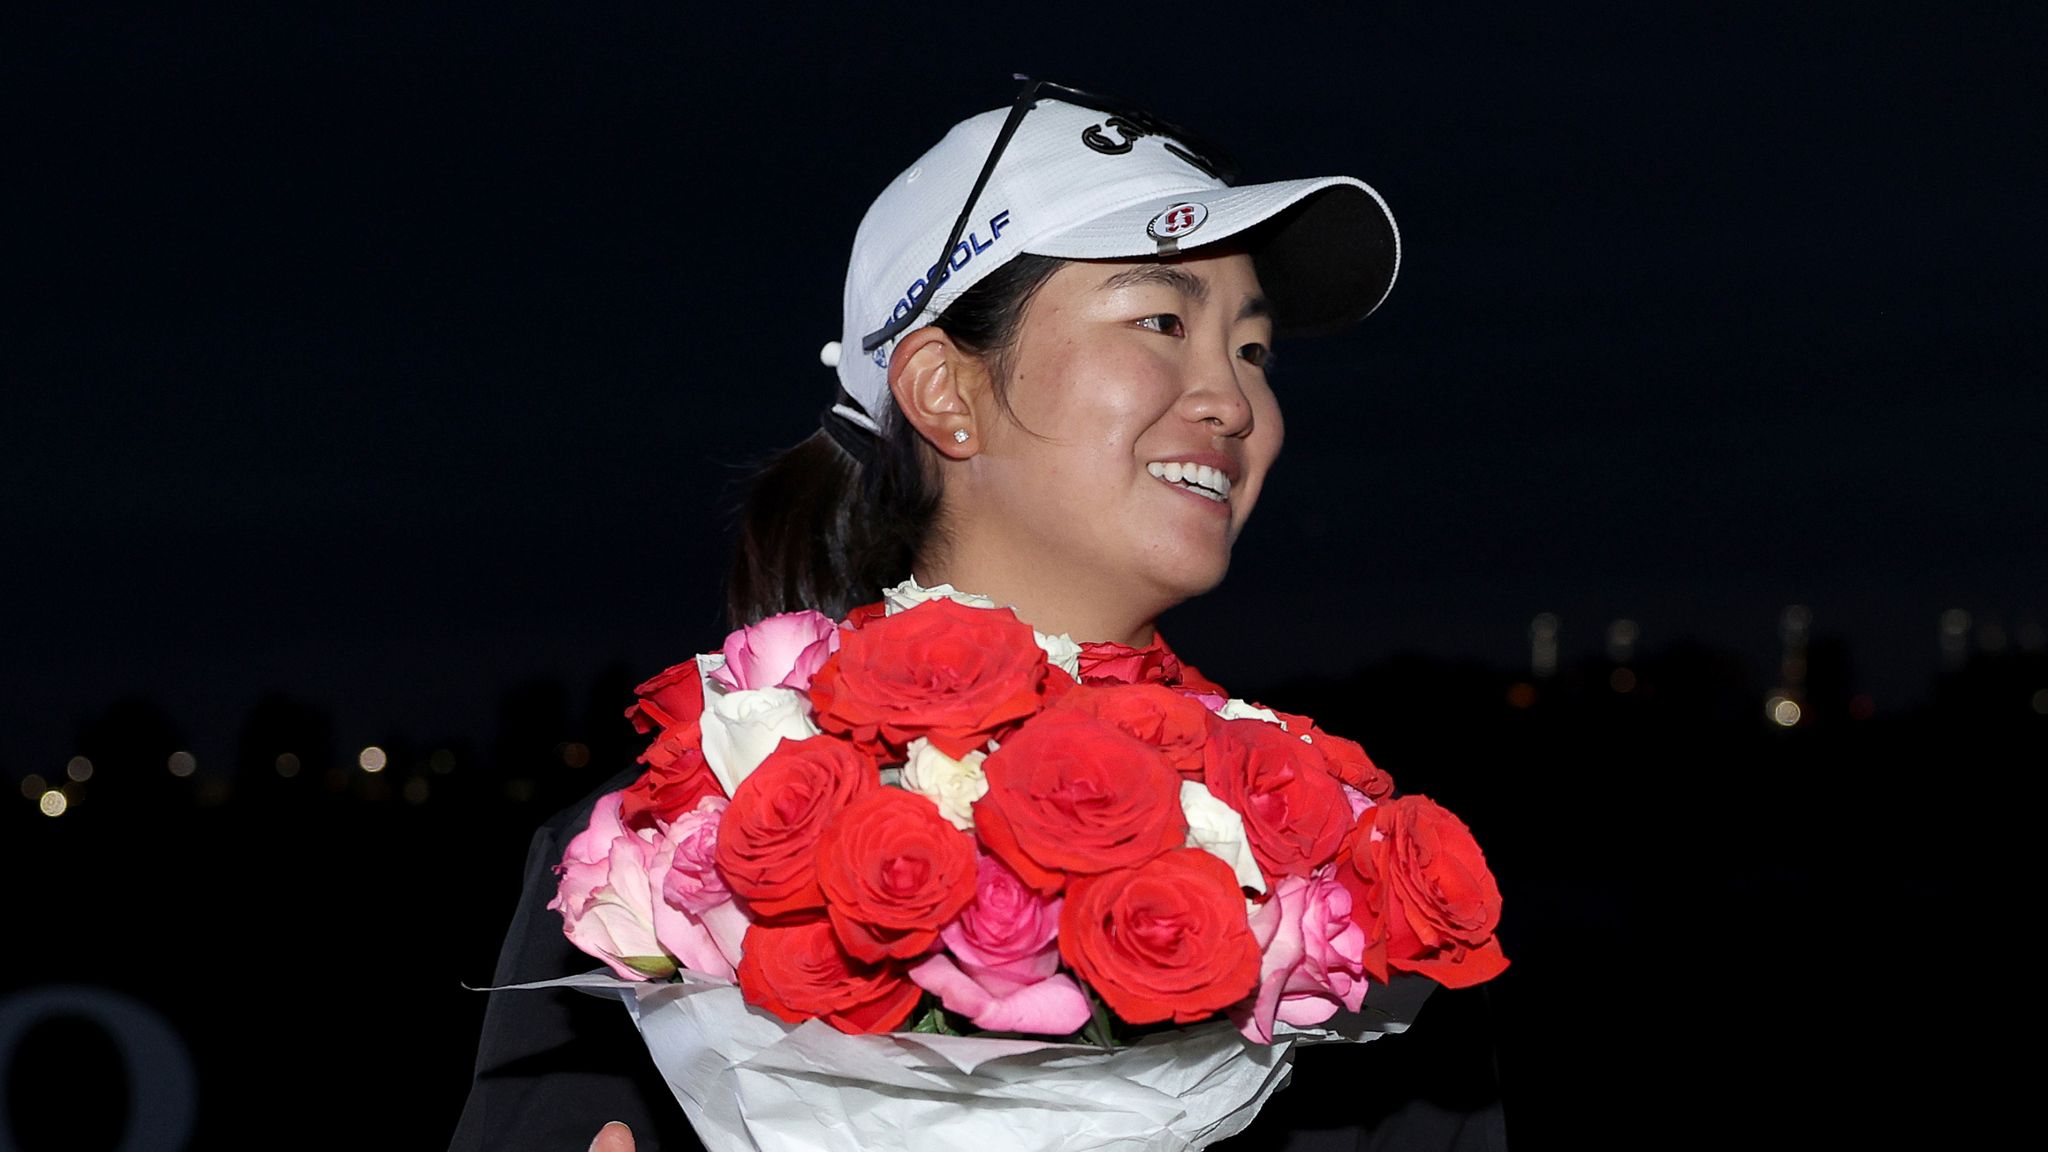 Meet Rose Zhang: The future face of women's golf going for victory